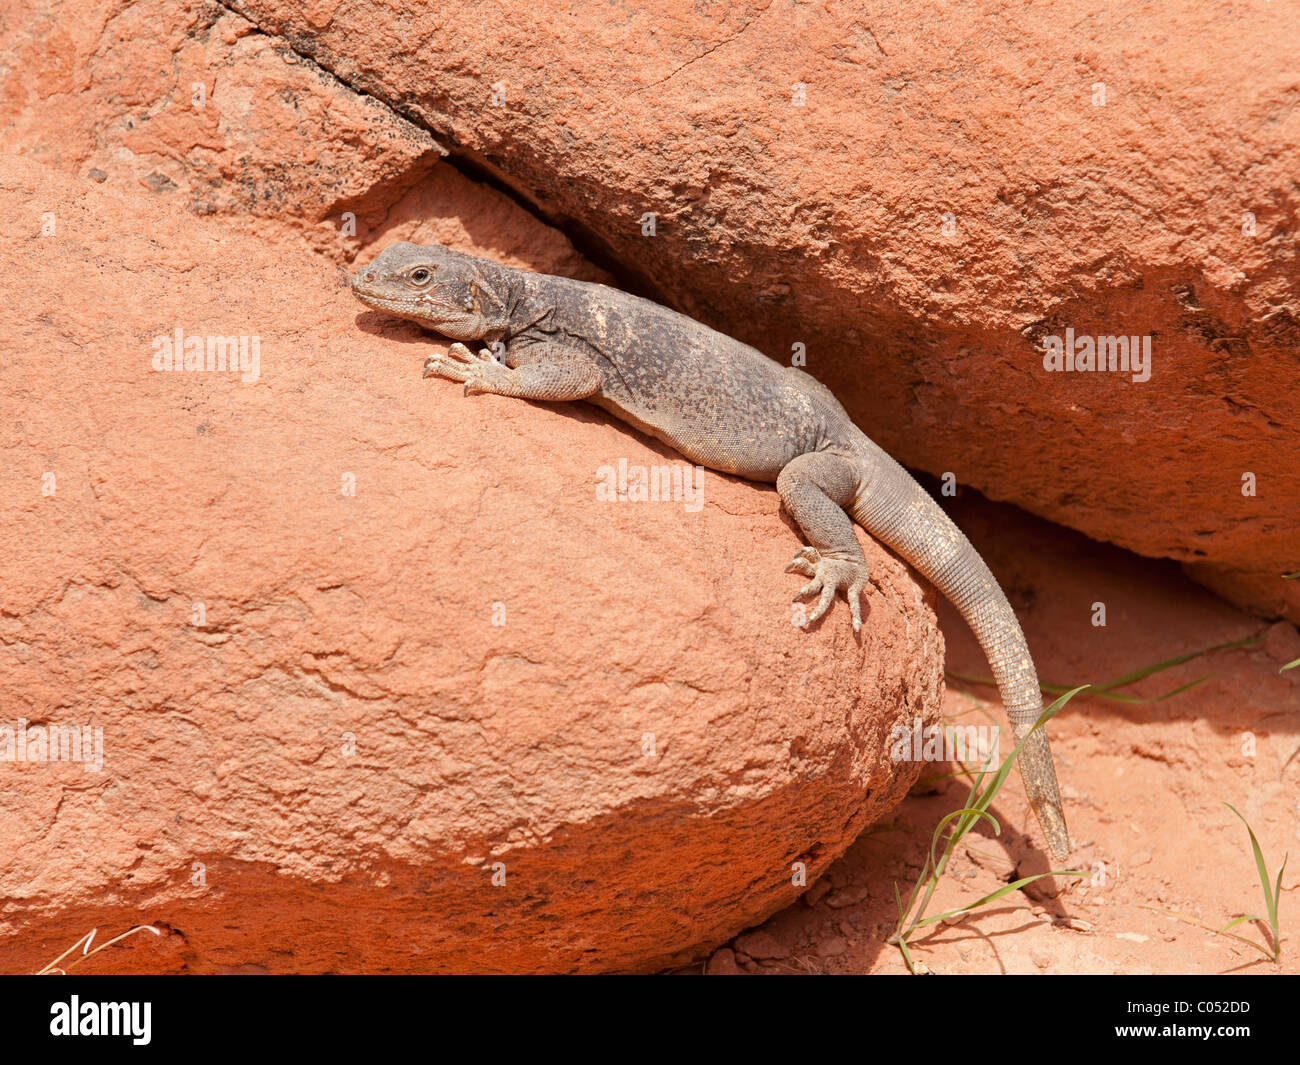 A Common Chuckwalla (Sauromalus ater), either a female or a juvenile, in Valley of Fire State Park, Nevada Stock Photo